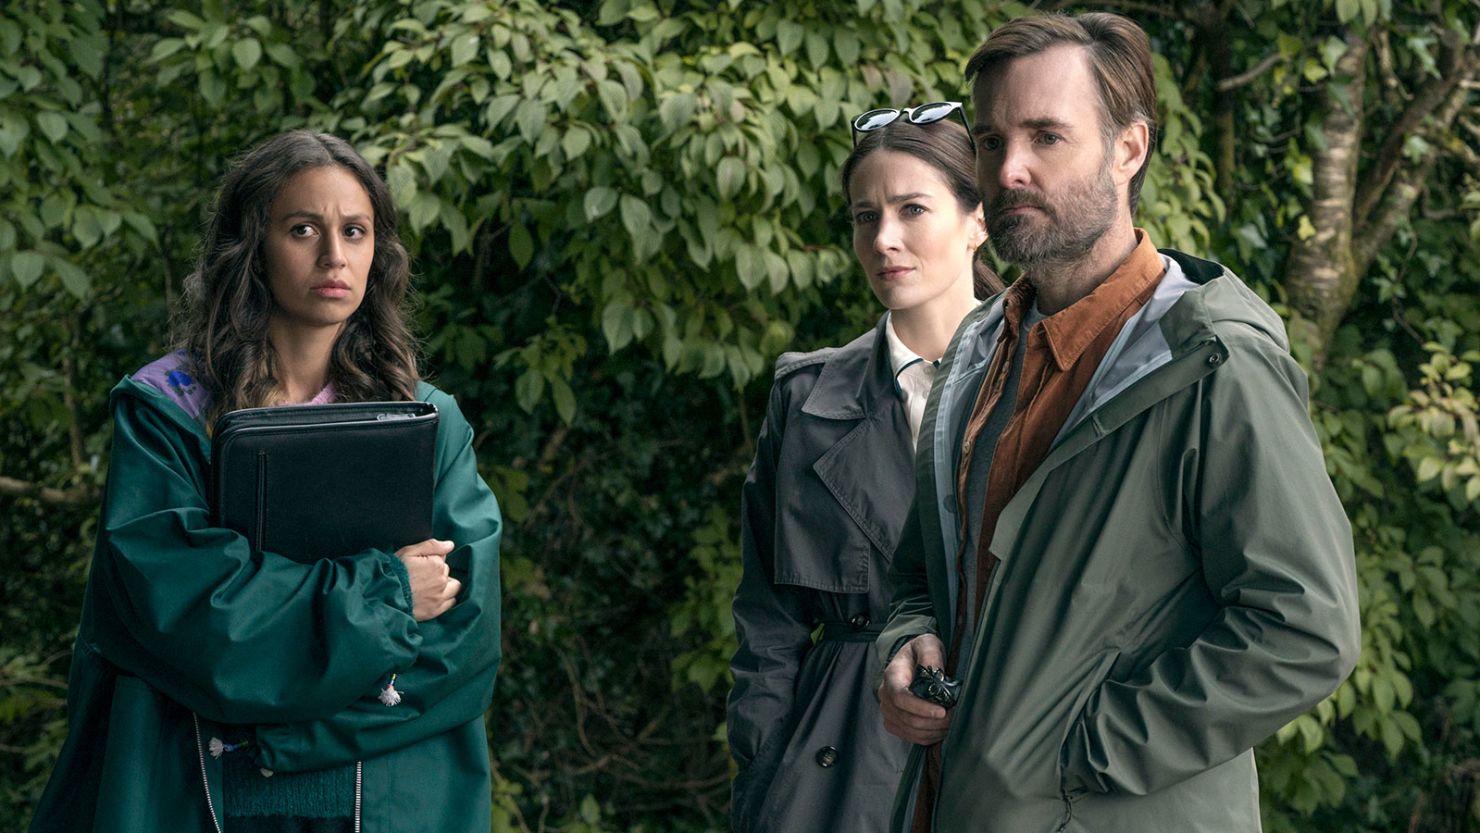 (from left) Robyn Cara, Siobhán Cullen and Will Forte play podcasters investigating a cold case in "Bodkin."